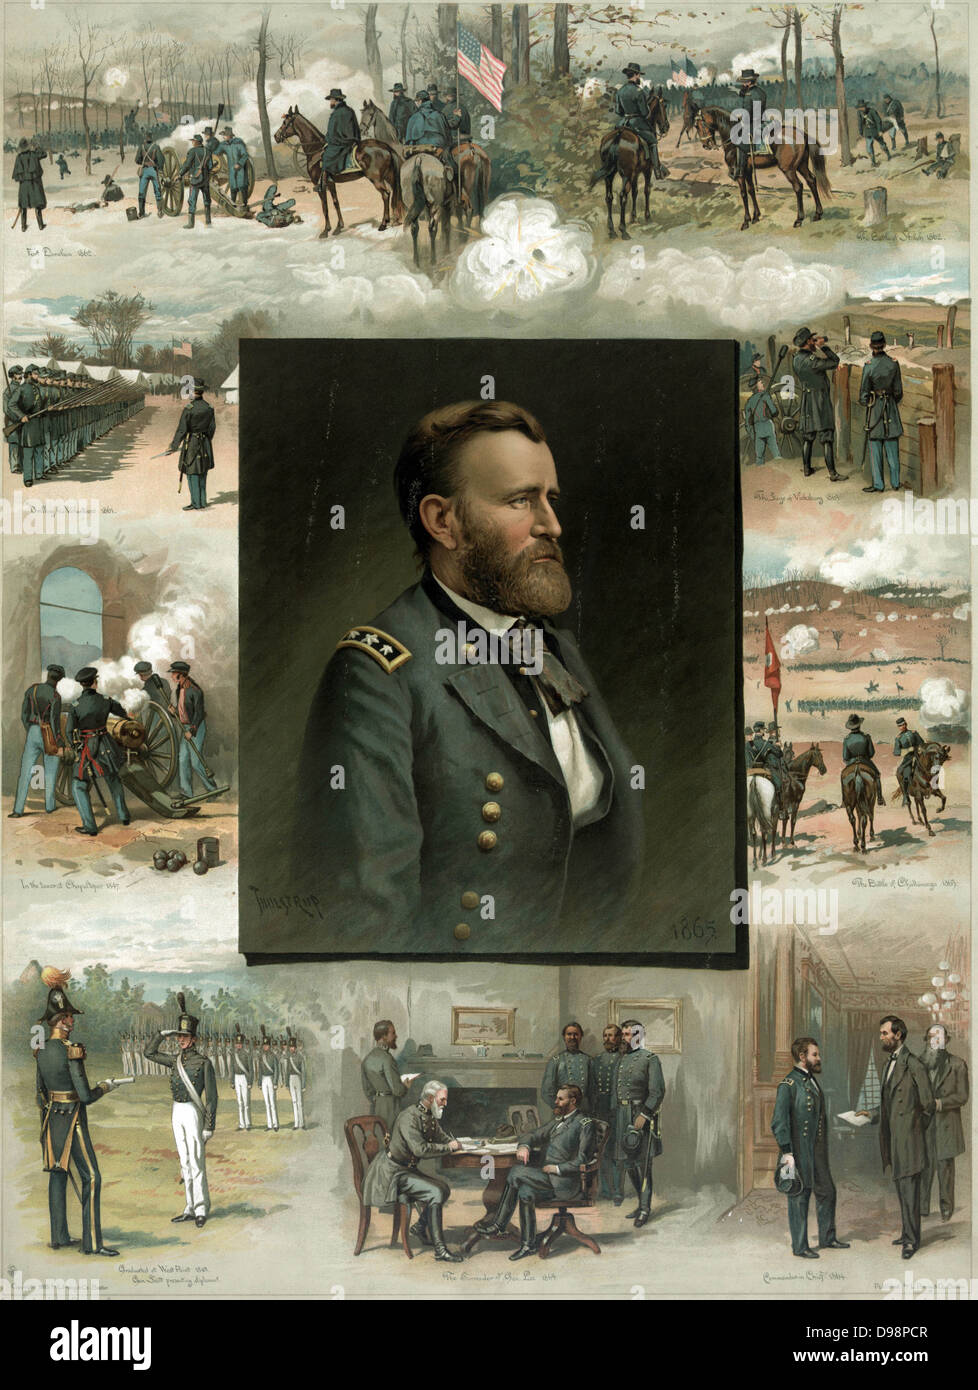 Scenes in life of Ulysses S Grant (1822-1885), 18th President of the United States, from graduation from West Point, 1843, through the American Civil War to Robert E Lee's surrender at Appotomax Court House in 1865. USA Union Stock Photo